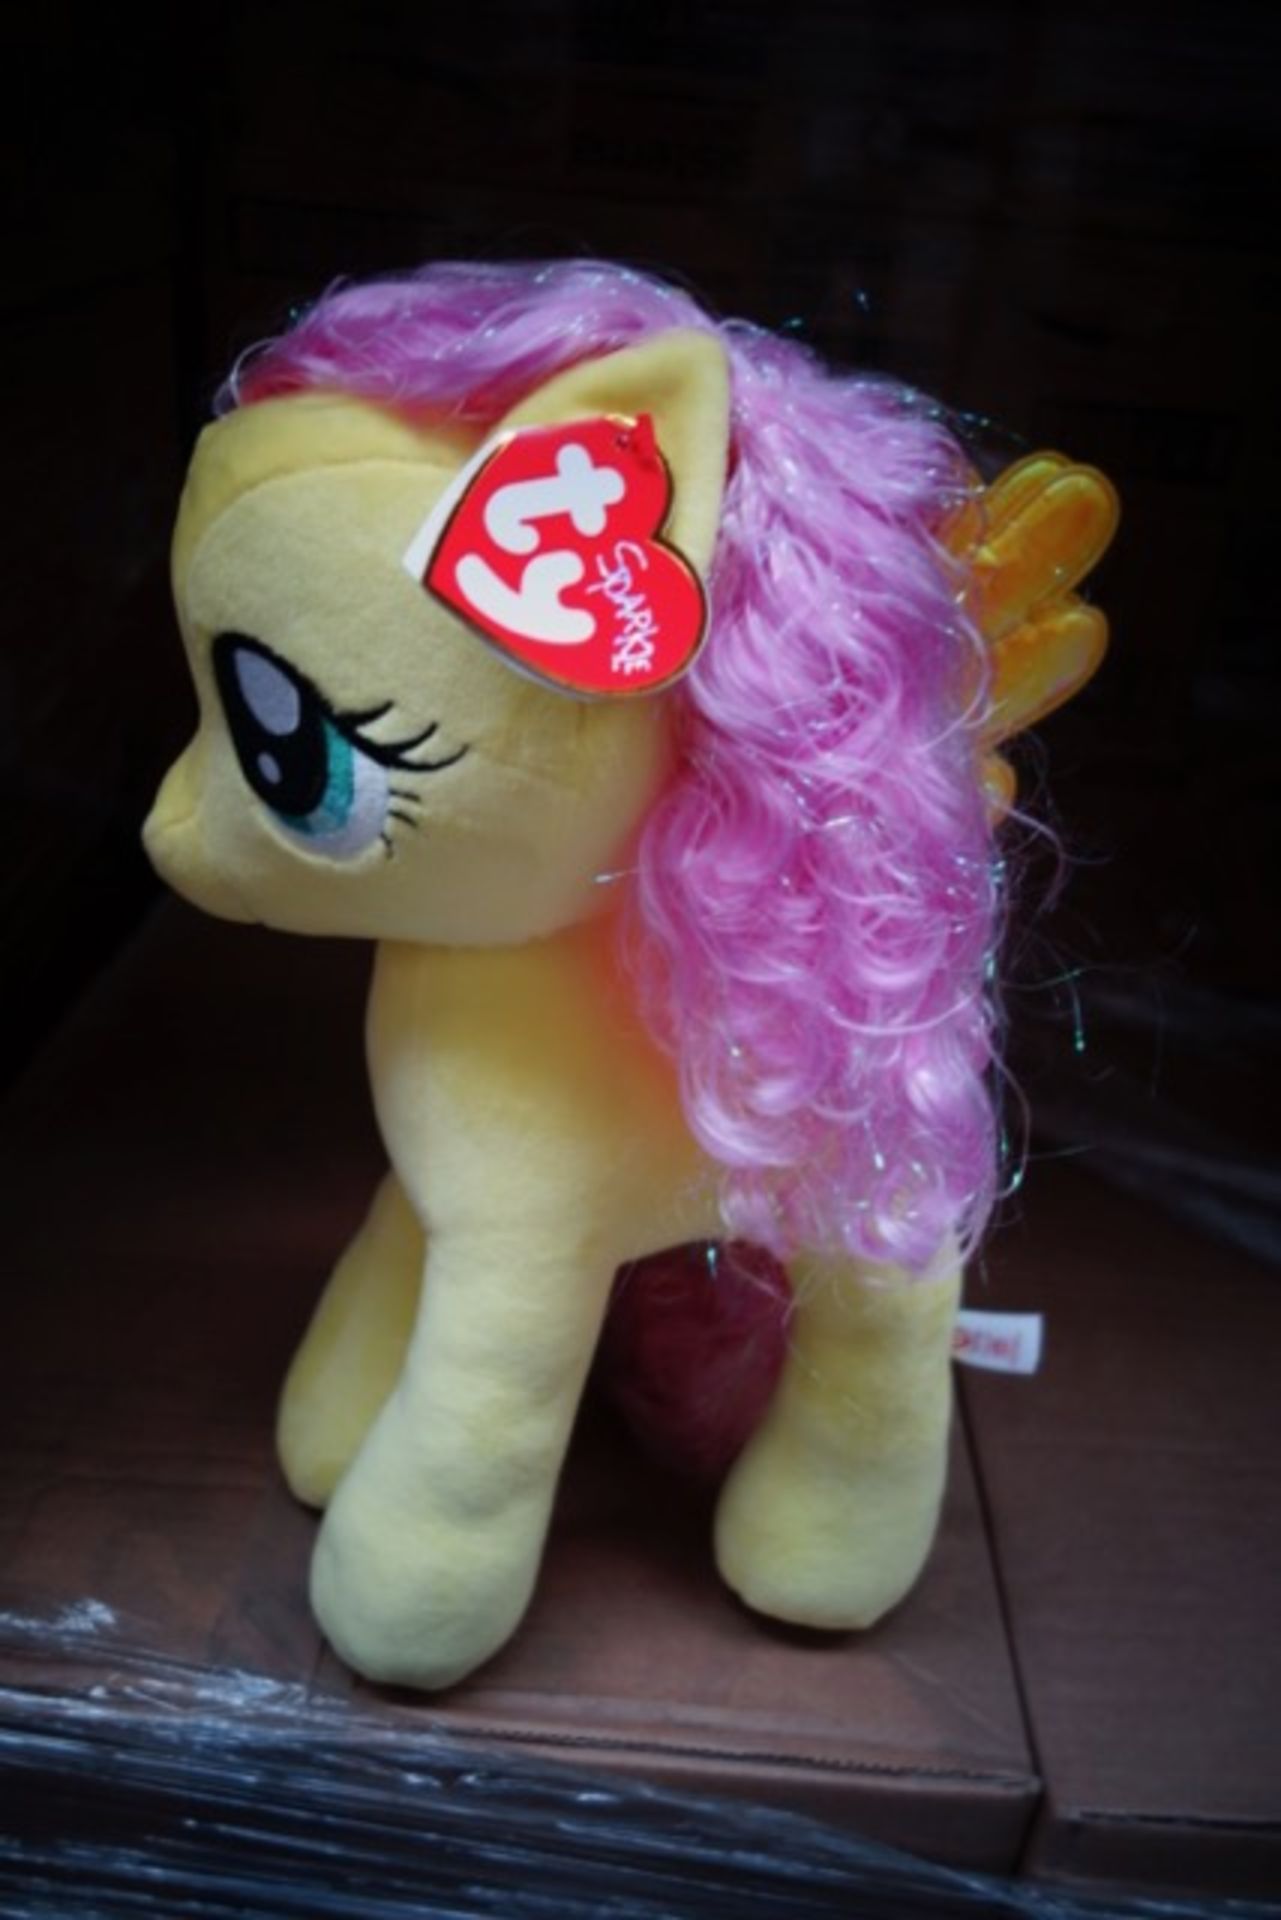 PALLET CONTAINING 60 x TY My Little Pony Fluttershy 16 Inch Large Plush. Brand new. RRP £29.99 EACH,